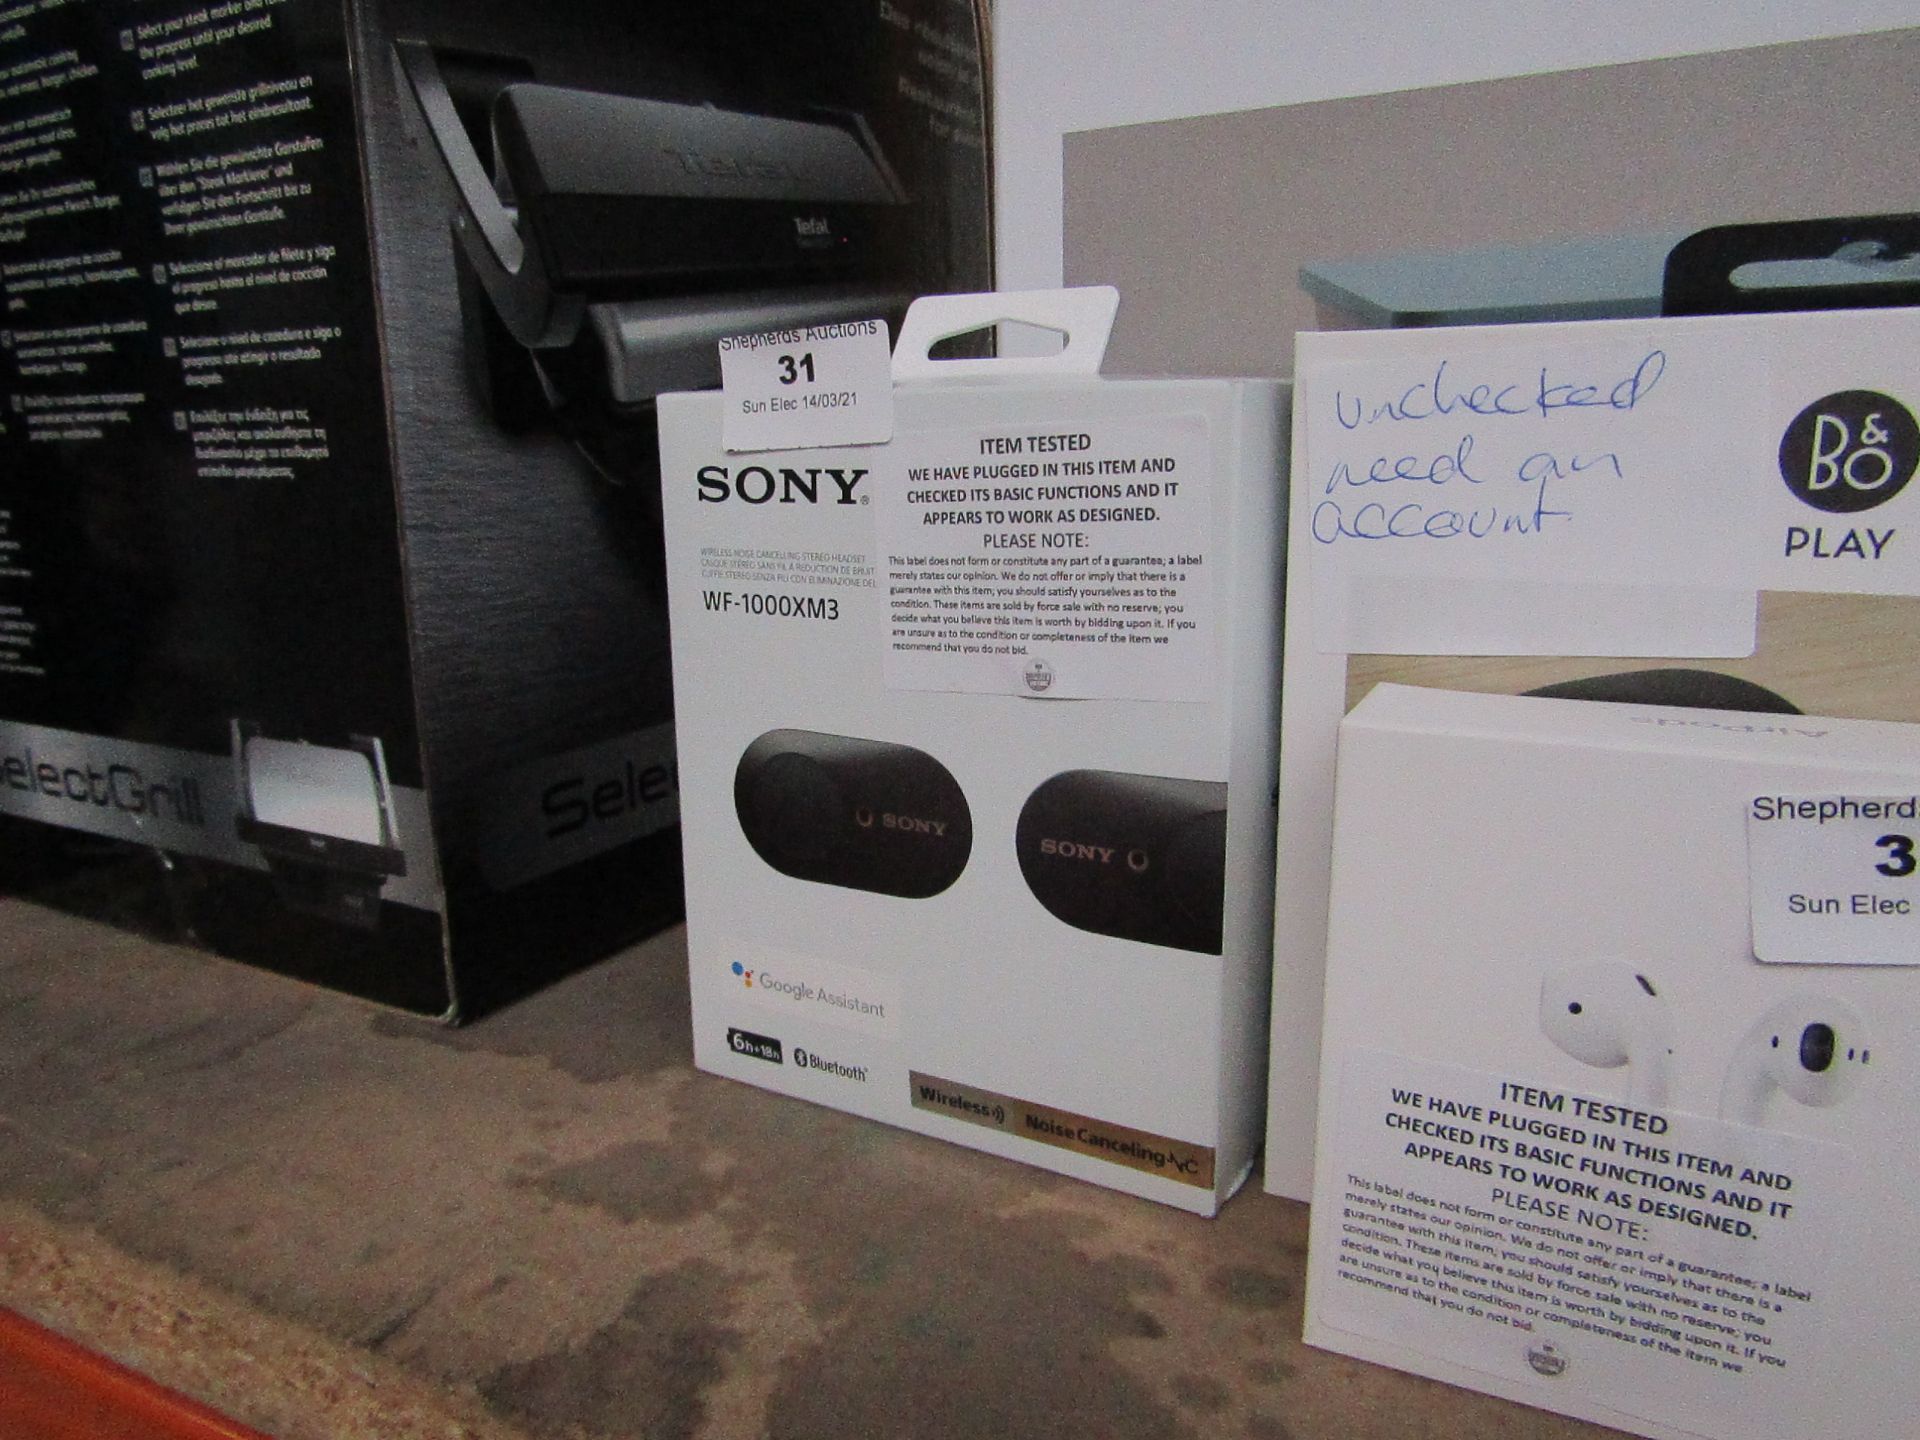 Sony WF-1000MX3 ear buds, tested working (charge untested) and boxed. RRP £179.99